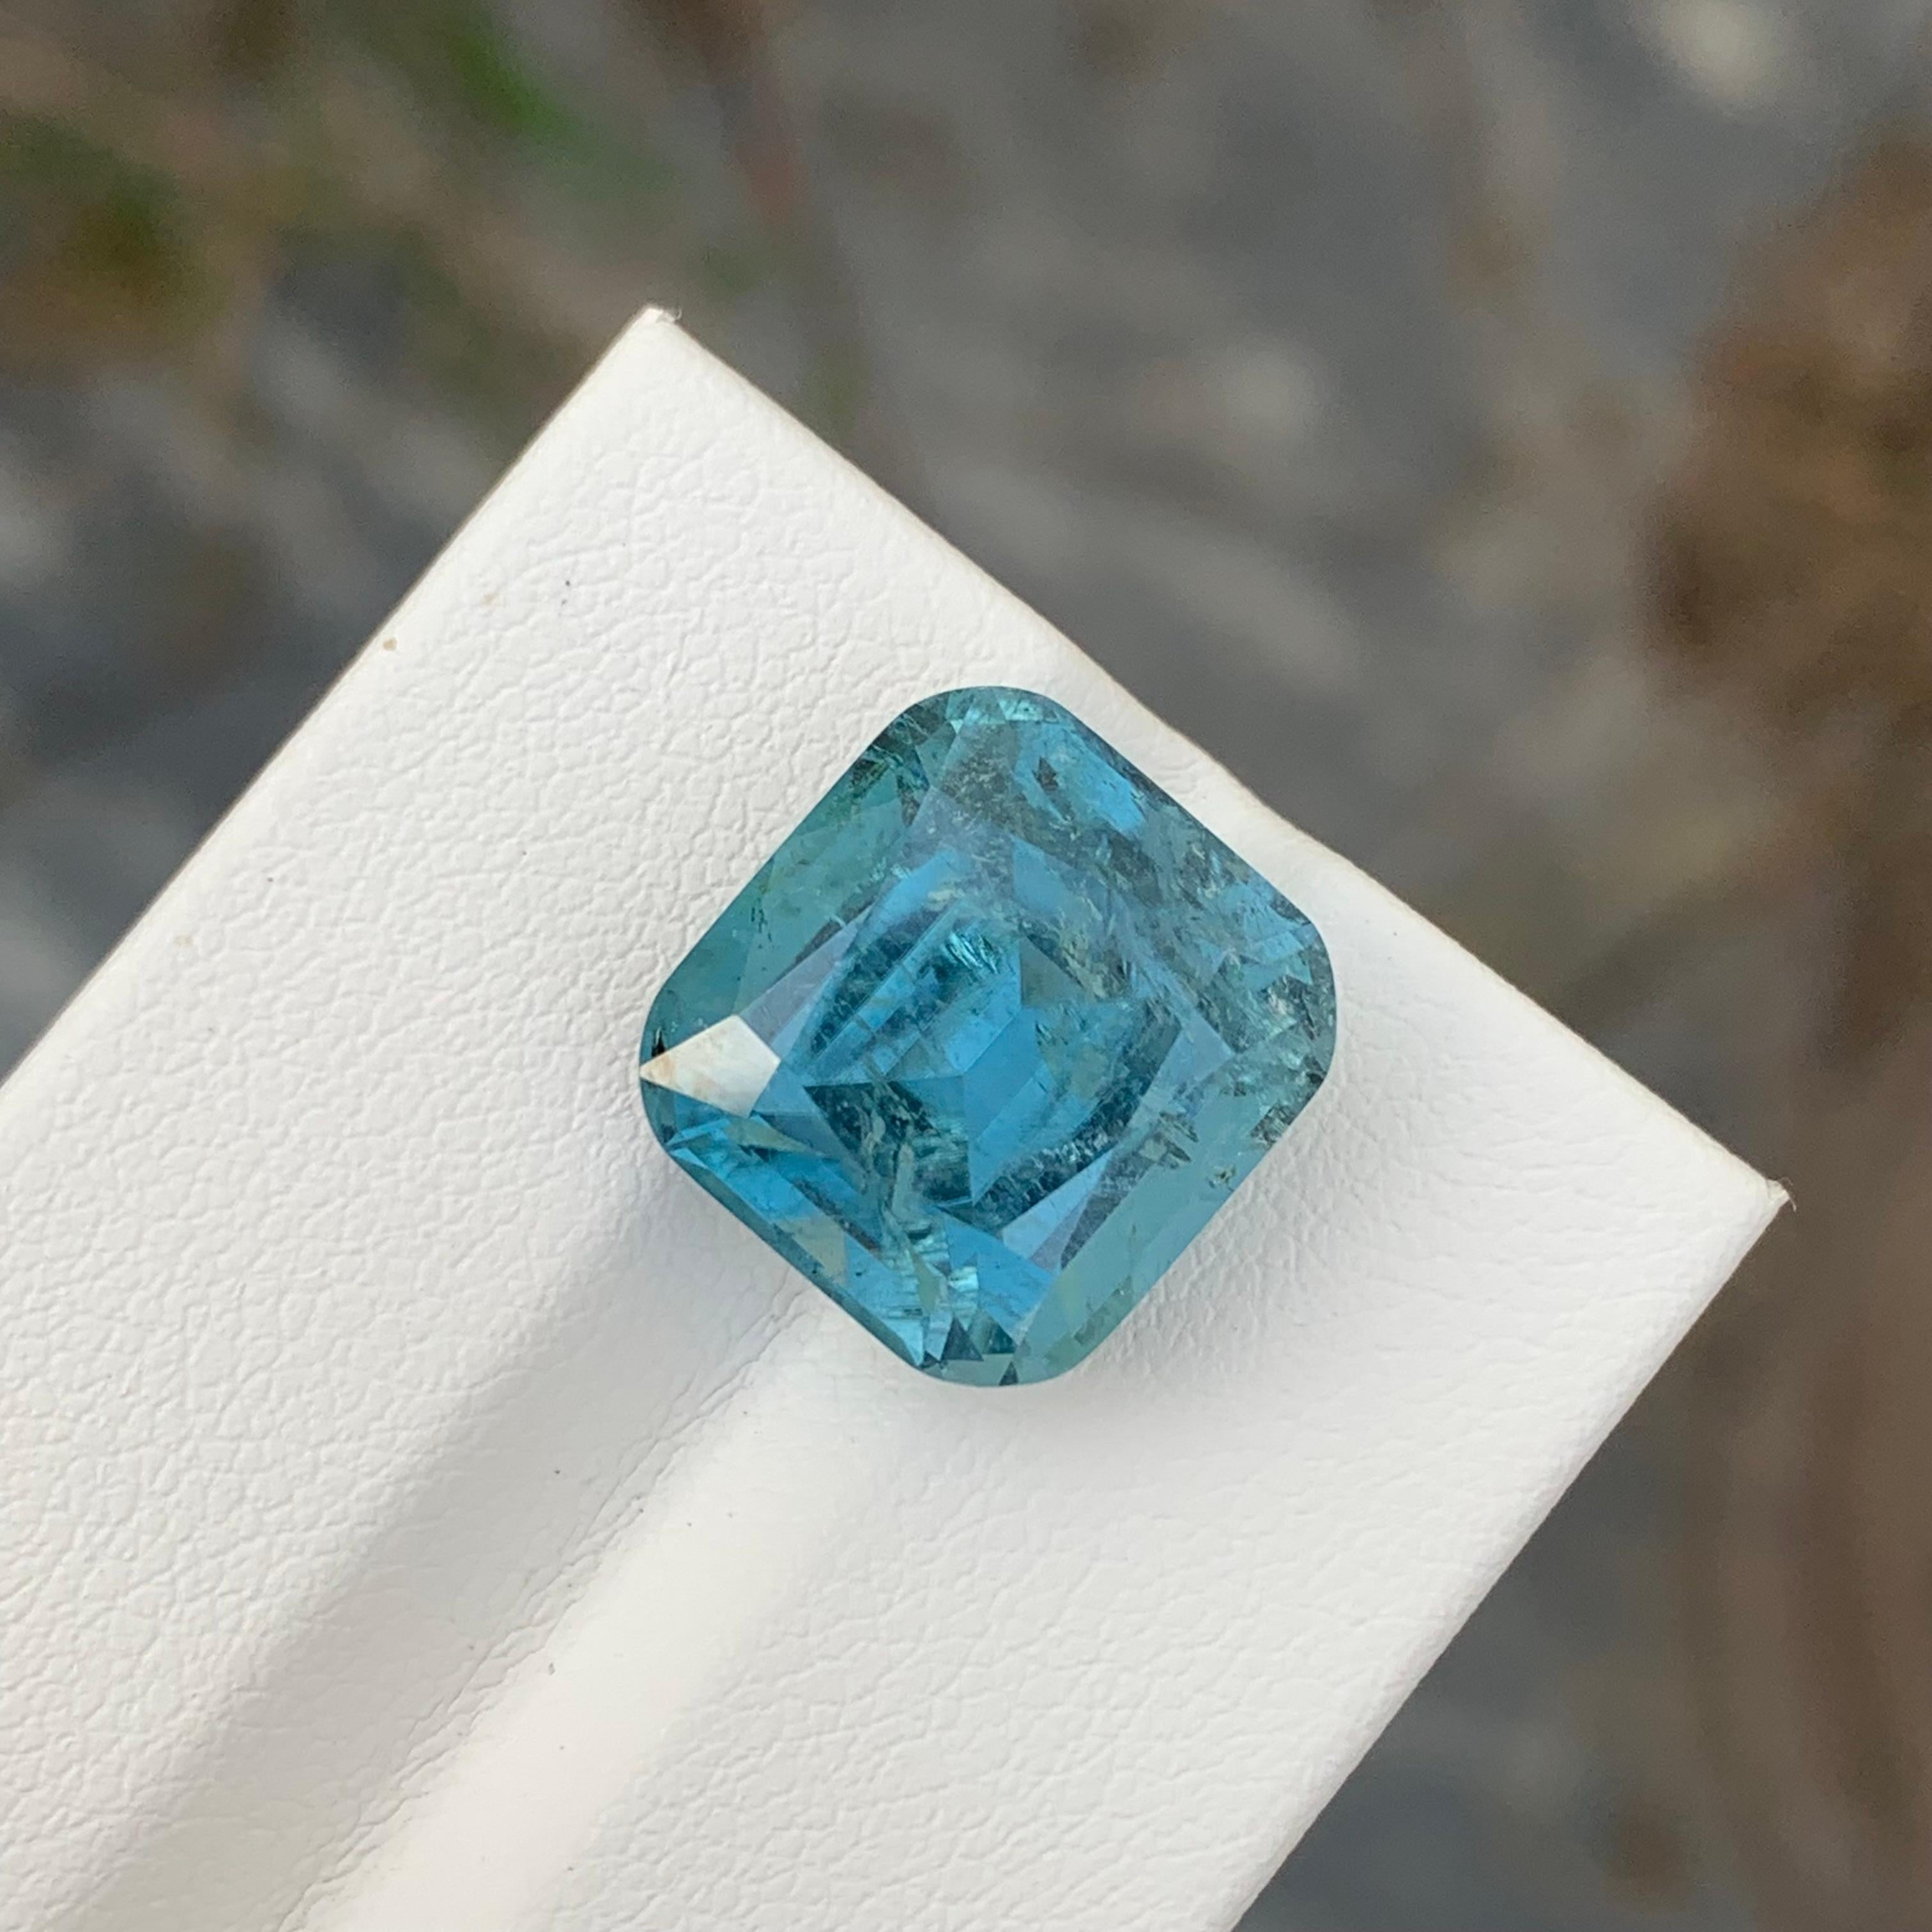 Loose Seafoam Tourmaline

Weight: 12.00 Carats
Dimension: 13.4 x 12.7 x 9.2 Mm
Colour: Blue
Origin: Afghanistan
Certificate: On Demand
Treatment: Non

Tourmaline is a captivating gemstone known for its remarkable variety of colors, making it a